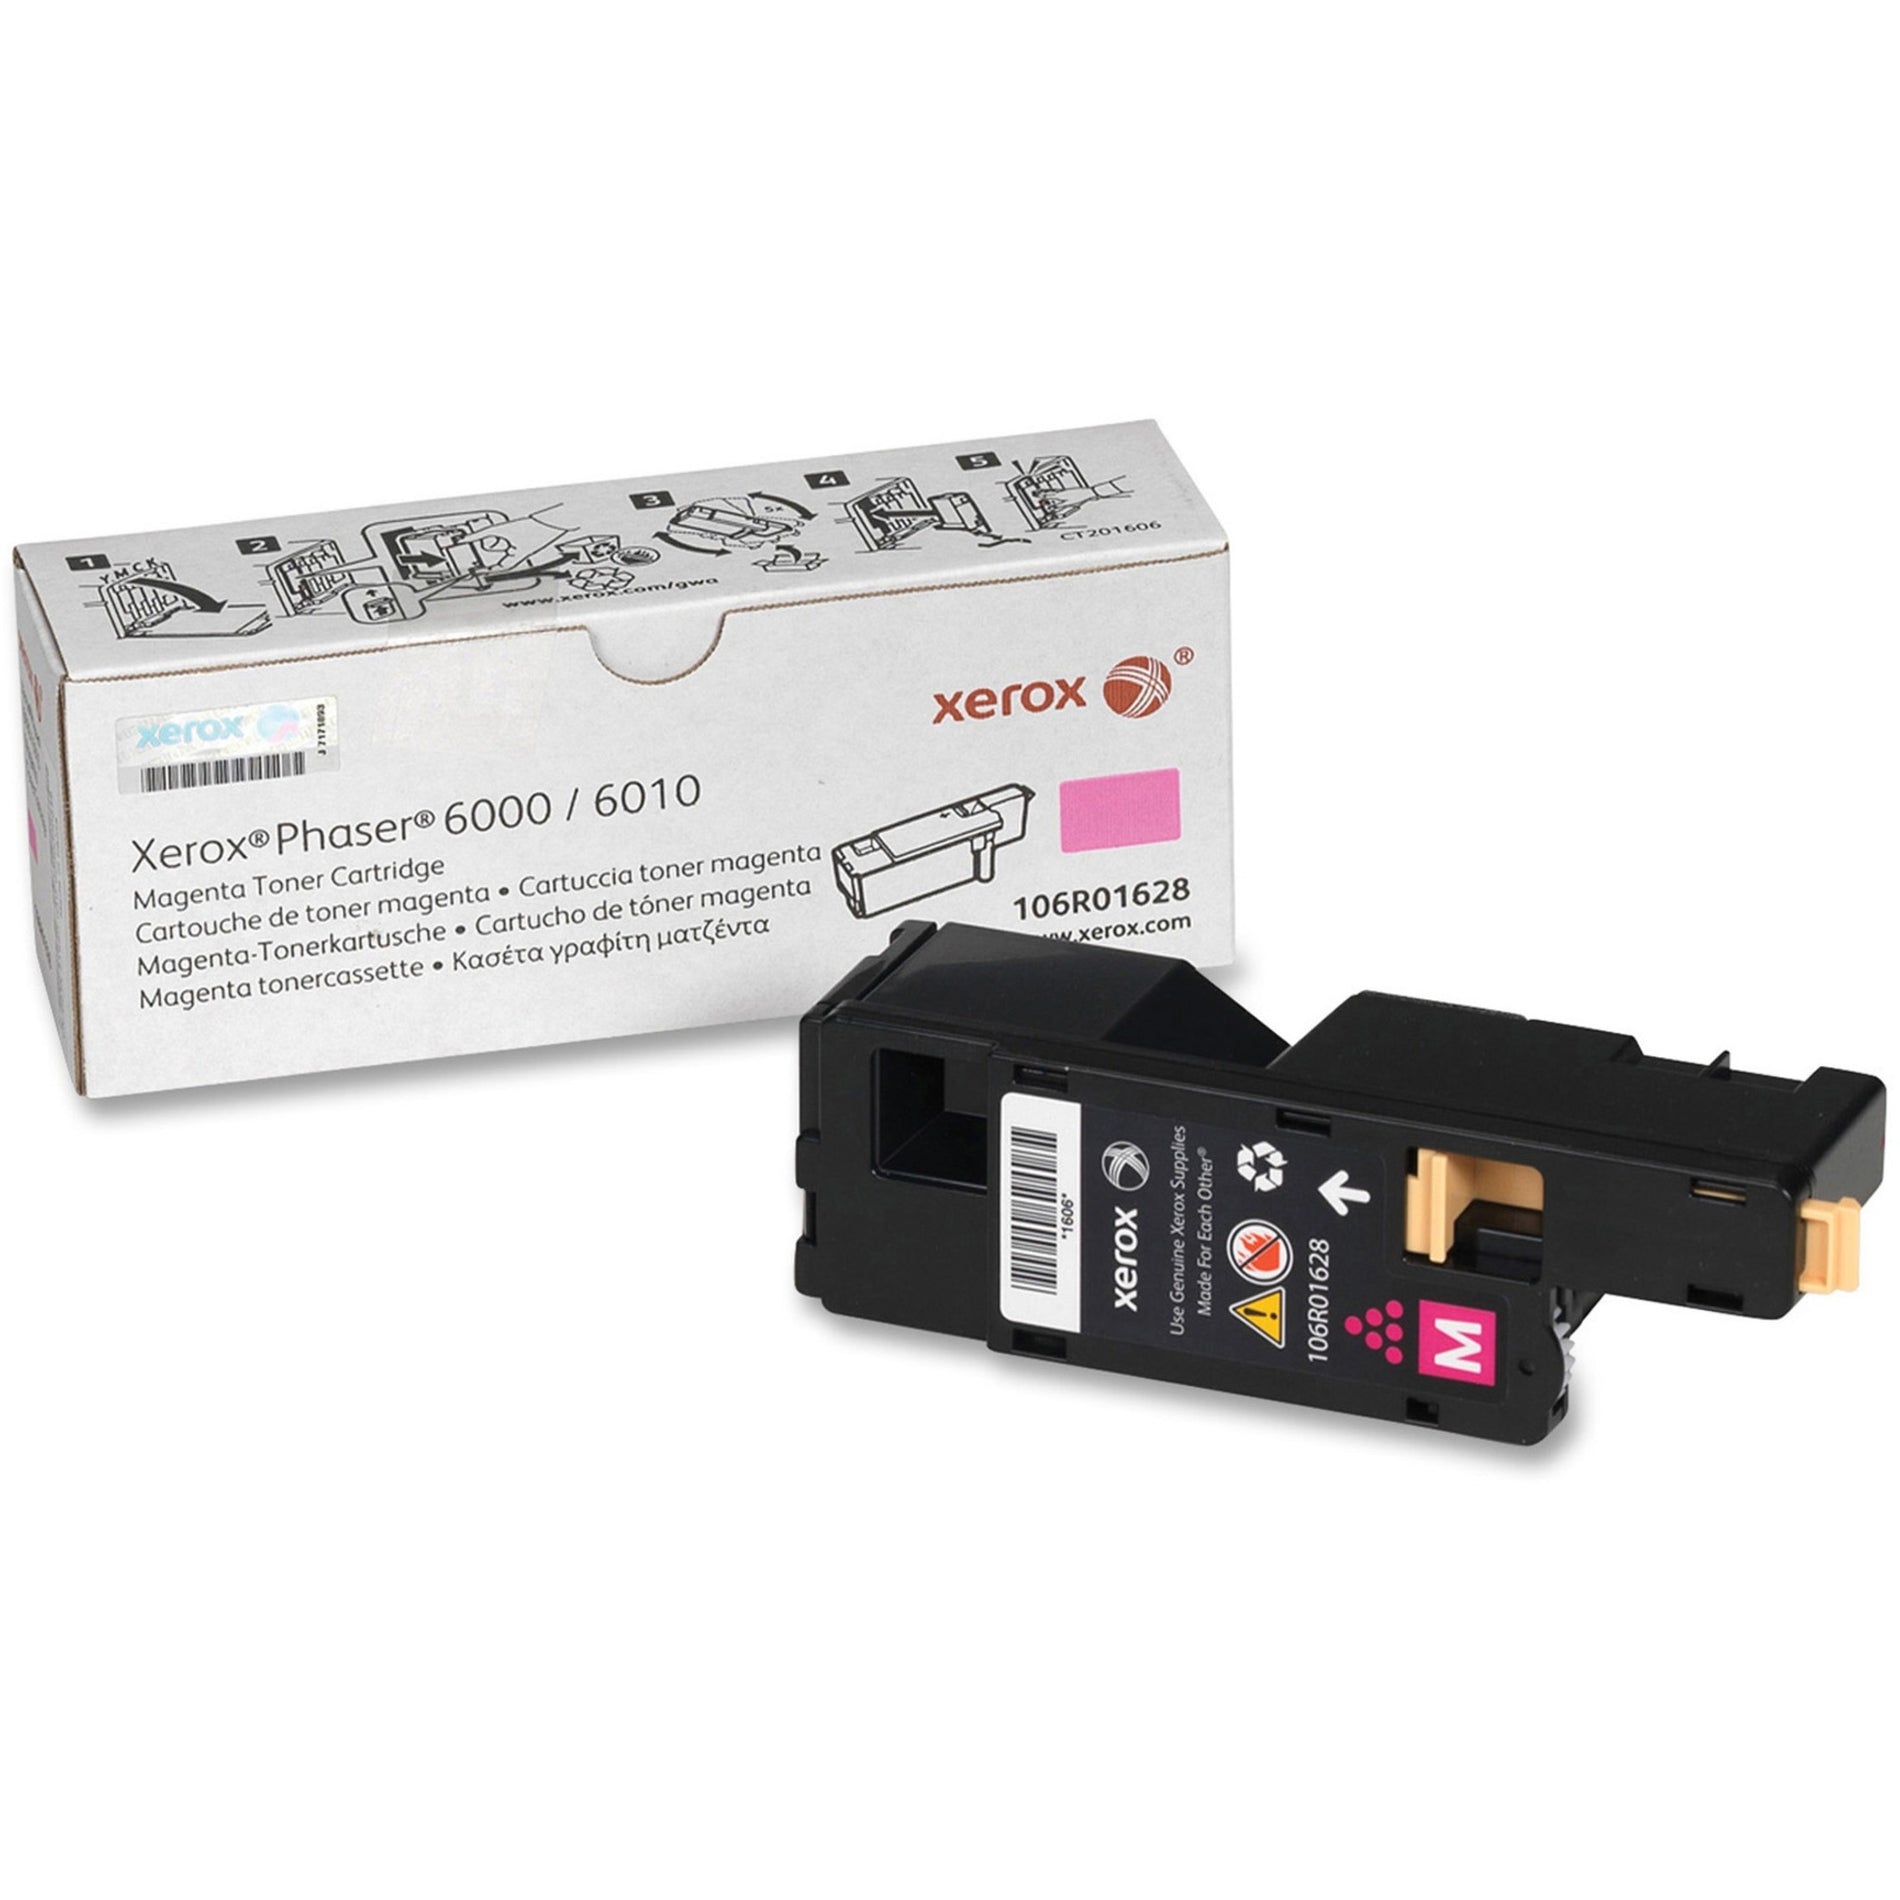 Xerox 106R01628 Phaser 6010/WorkCentre 6015 Toner Cartridge, Magenta, 1000 Pages